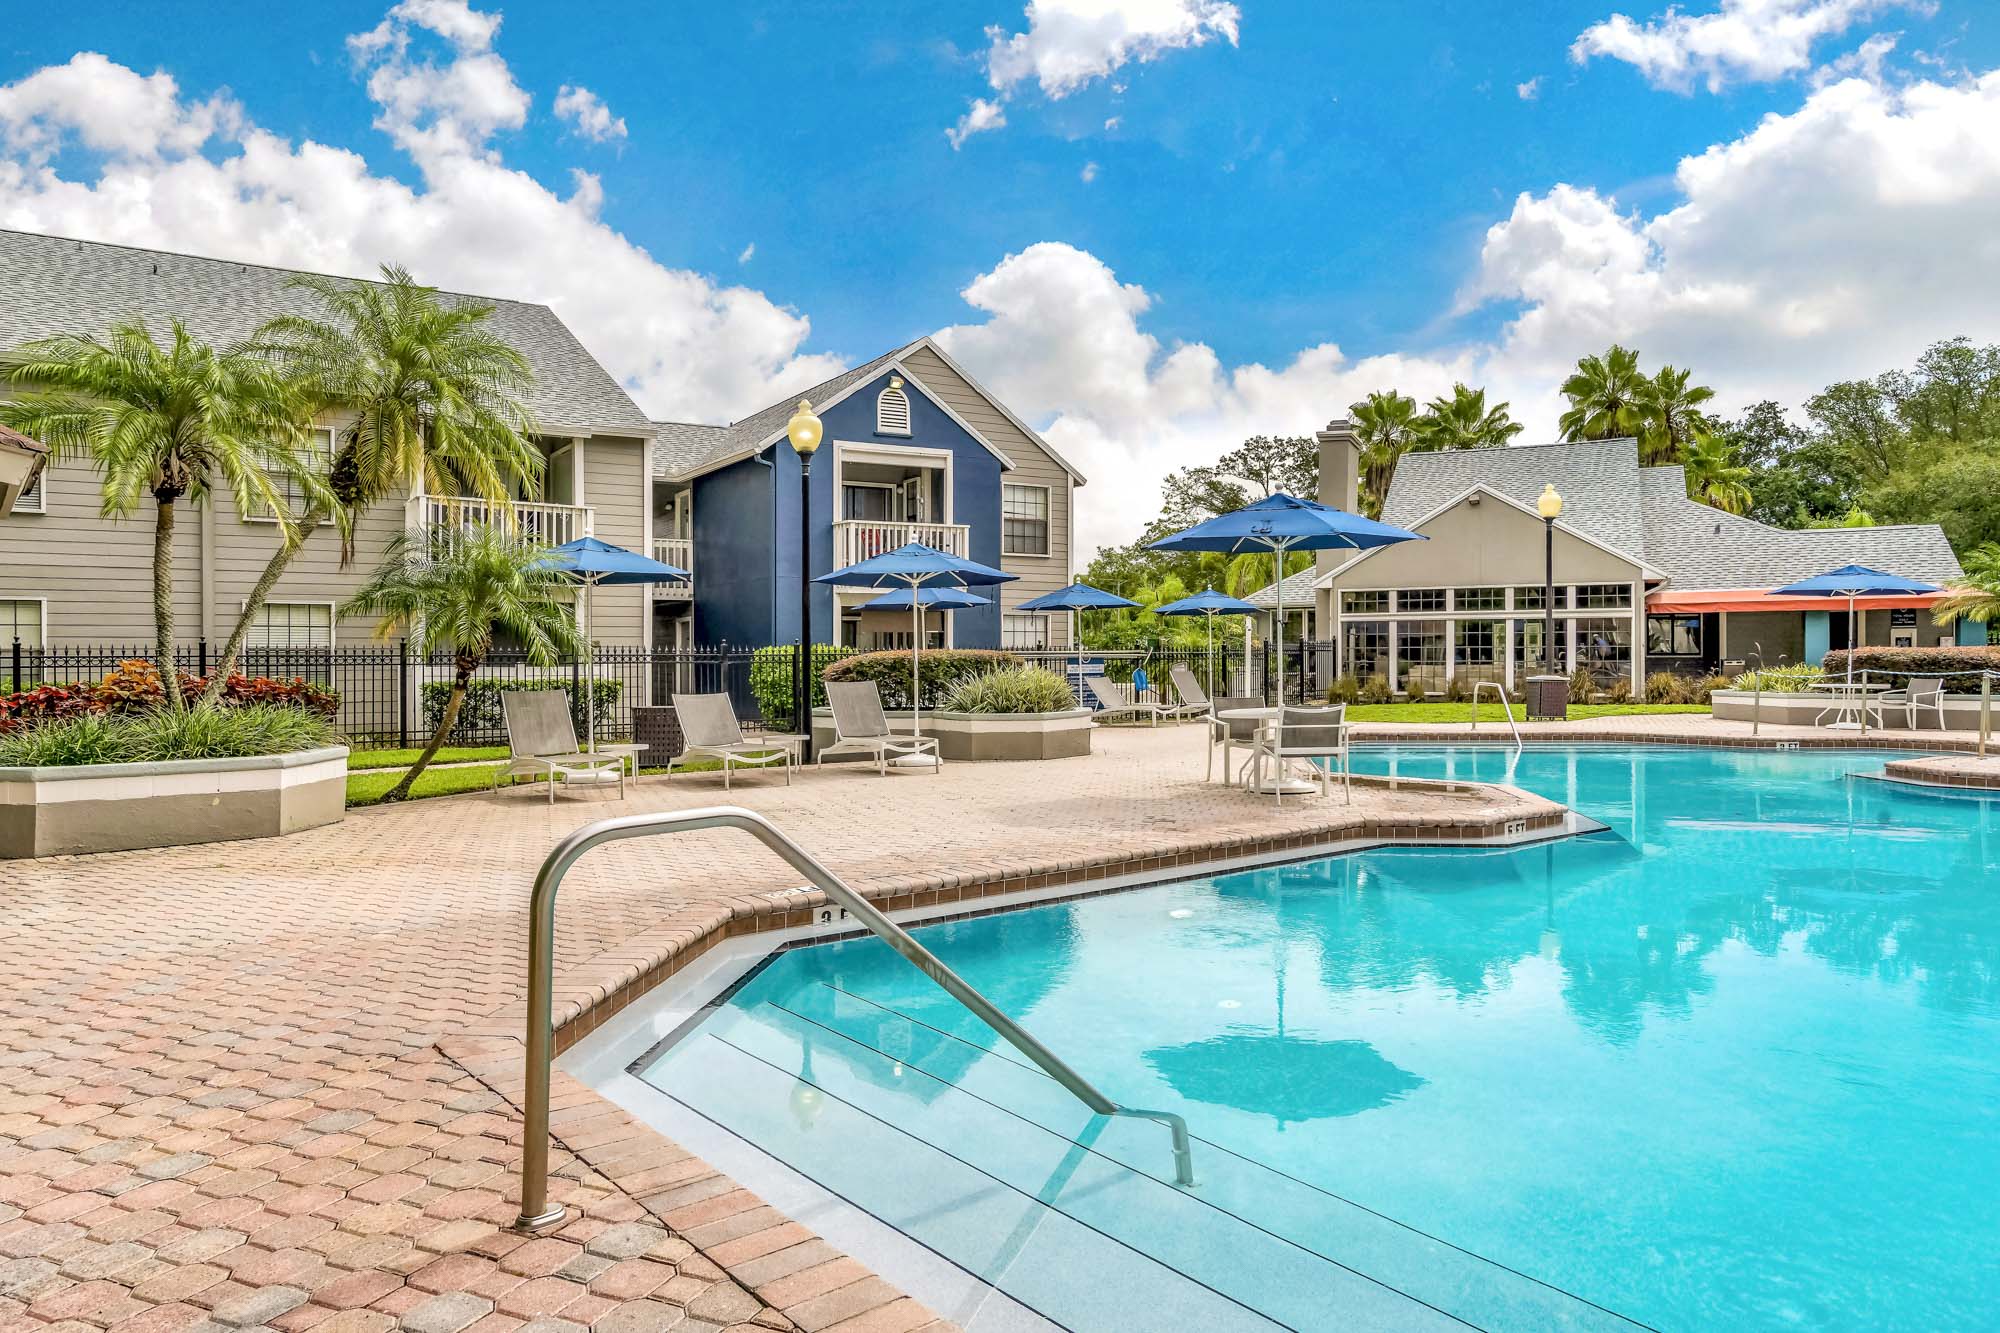 The pool at St. James Crossing apartments in Tampa, Florida.